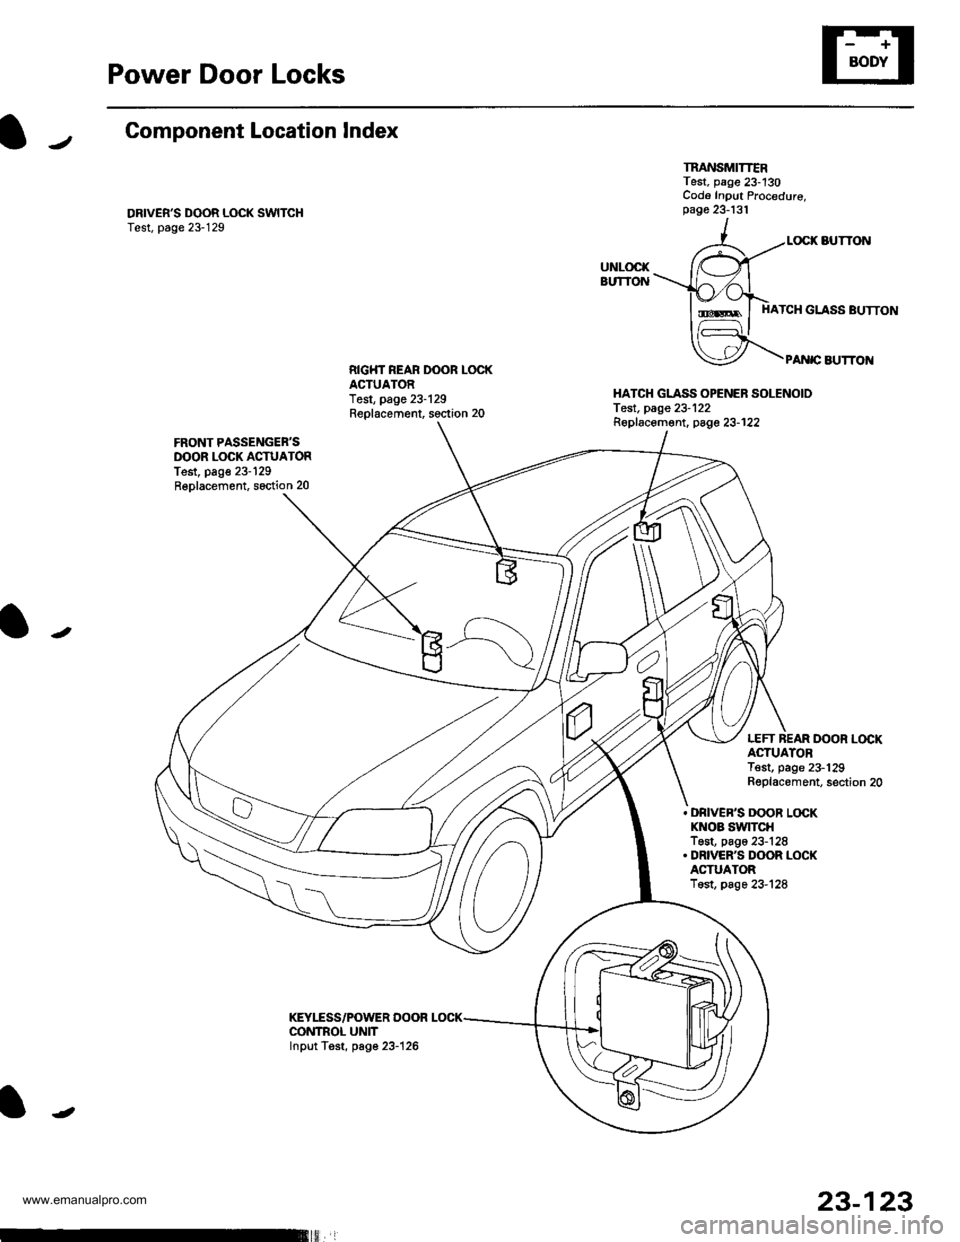 HONDA CR-V 1998 RD1-RD3 / 1.G Workshop Manual 
Power Door Locks
Component Location lndex
DRIVERS DOOR L(rcK SWITCHTest, page 23-129
TRANSMITTERTest, page 23-130Cod6 Input Procedure,page 23-131
LOCK BUTTON
HATCH GLASS BUTTON
PA rc AUTTO]IIRIGT{T 